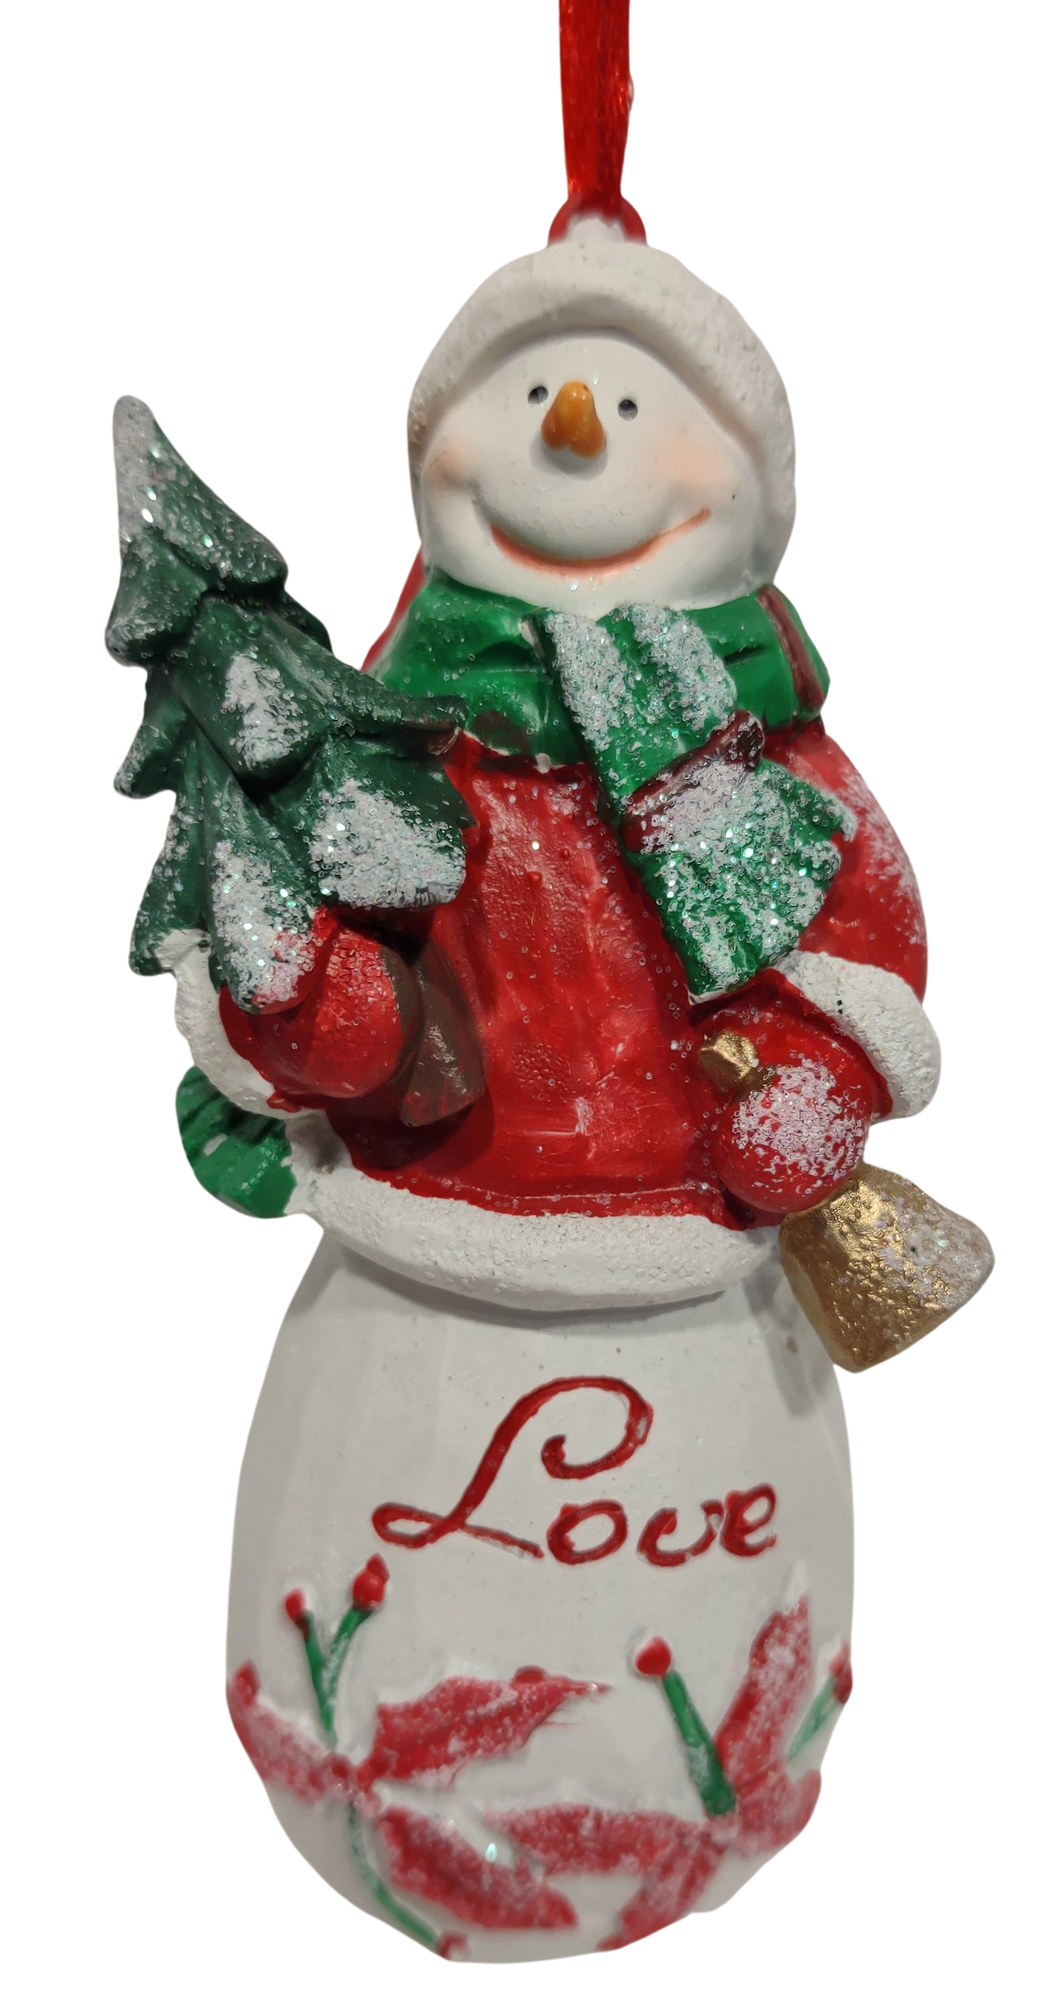 Snowman Ornament with Green Christmas Tree - Love 4.5